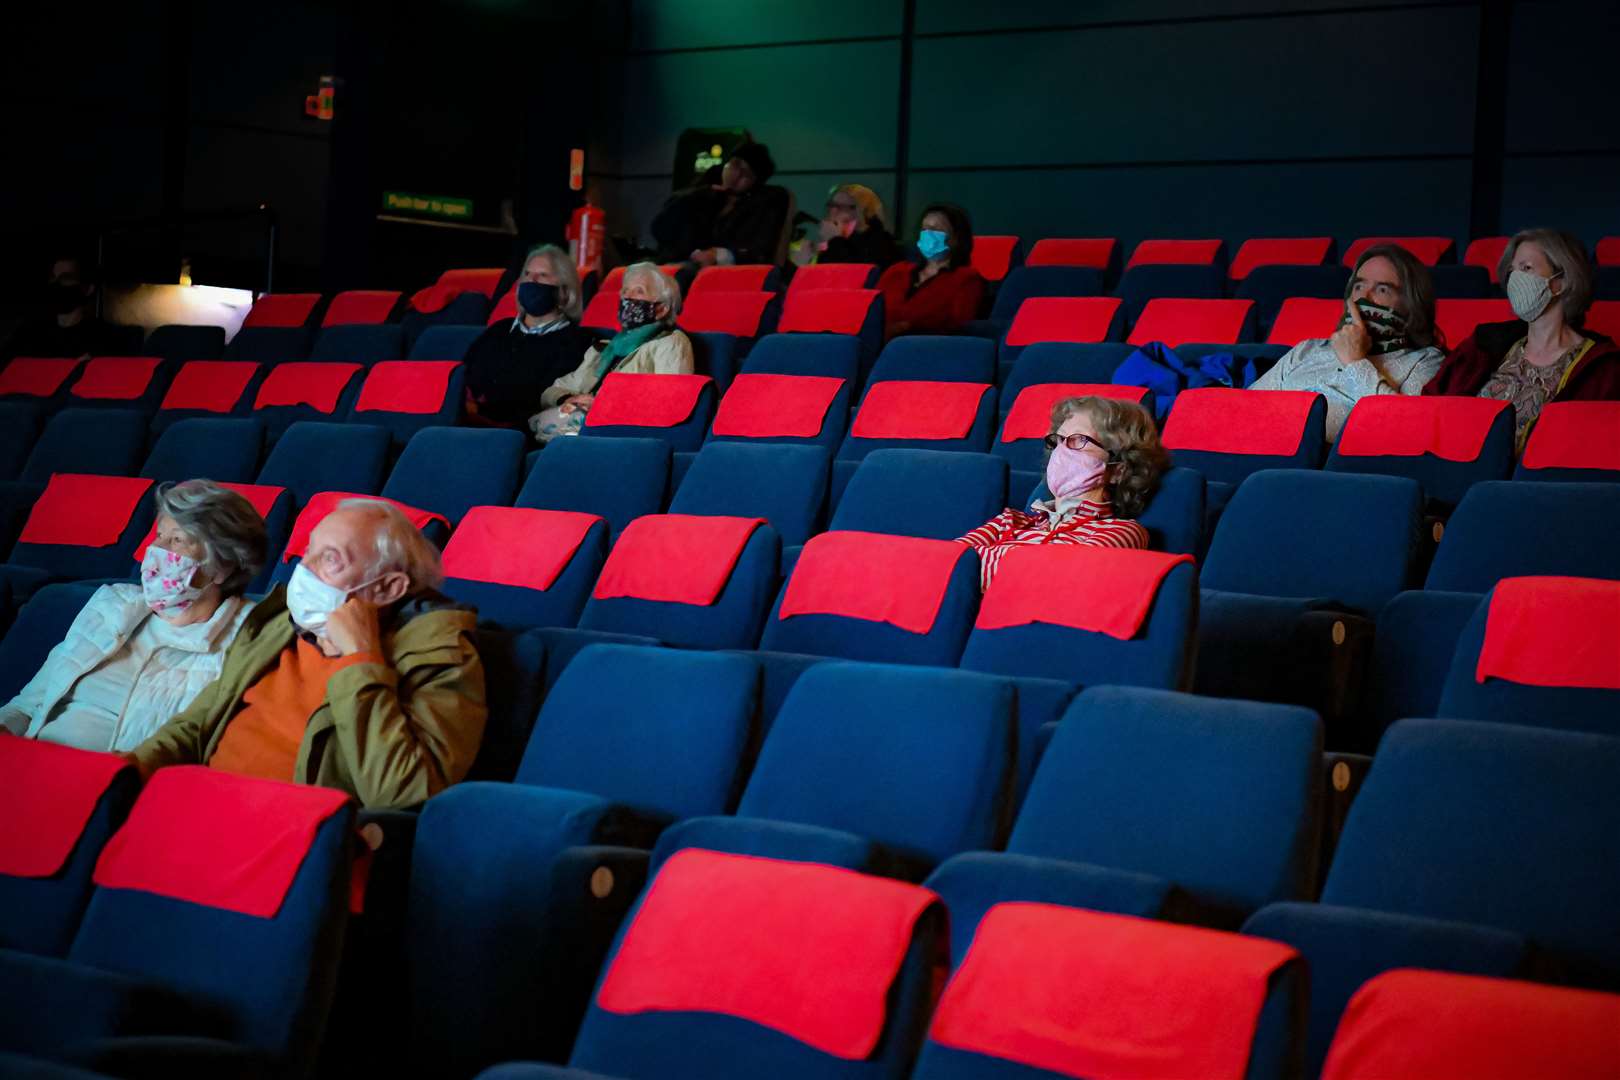 Cinema audiences watch Nomadland at Chapter, Cardiff, as indoor hospitality and entertainment venues reopen to the public (Ben Birchall/PA)